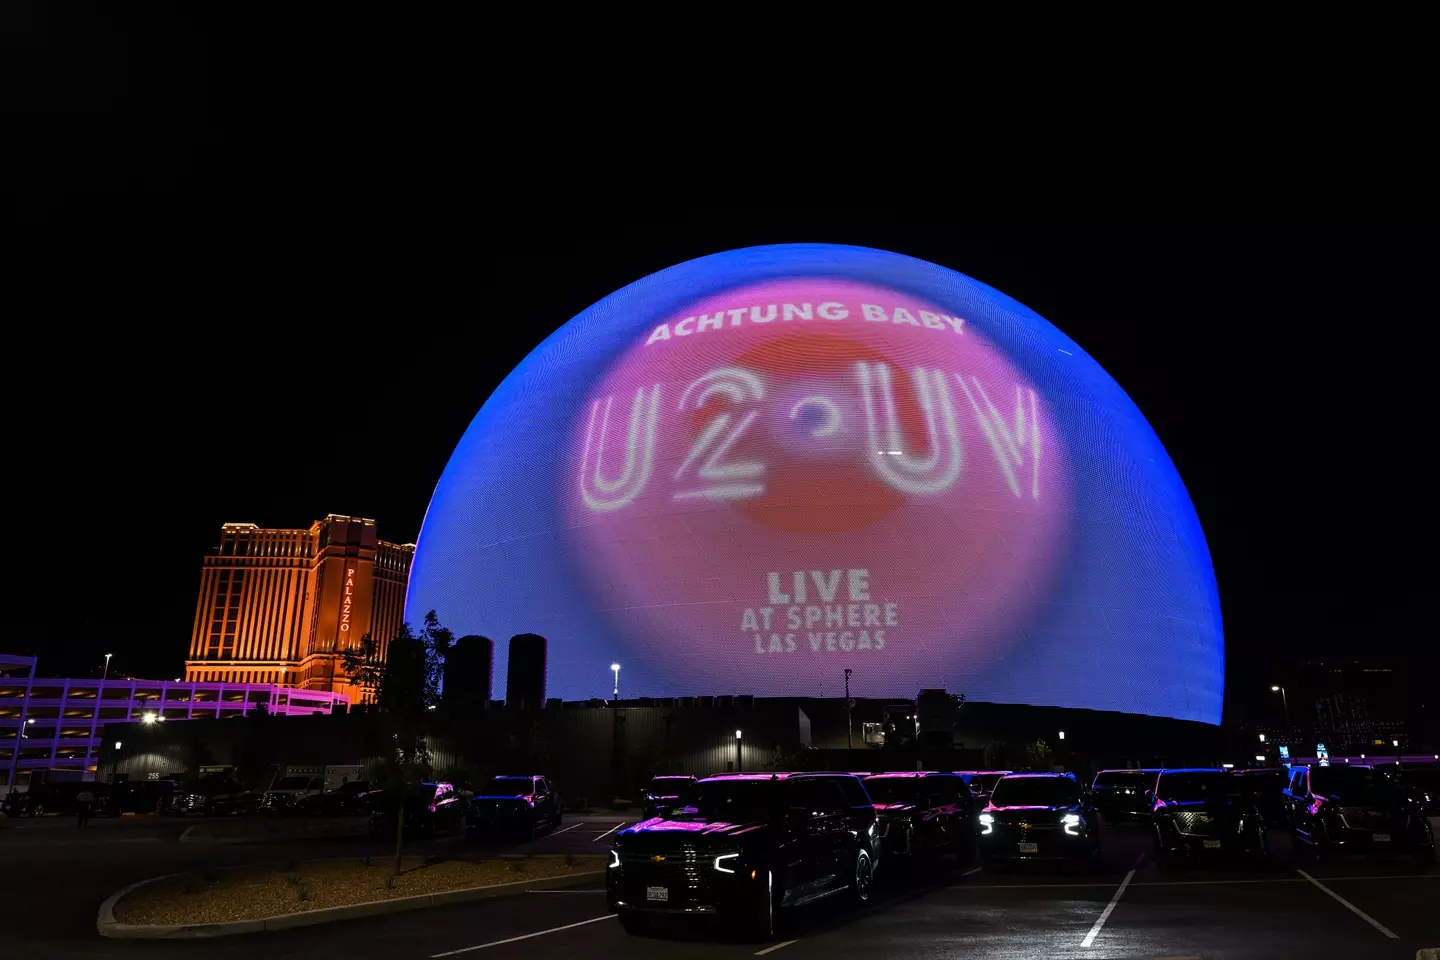 There are said to be a million LED lights on the outside of the Las Vegas Sphere.